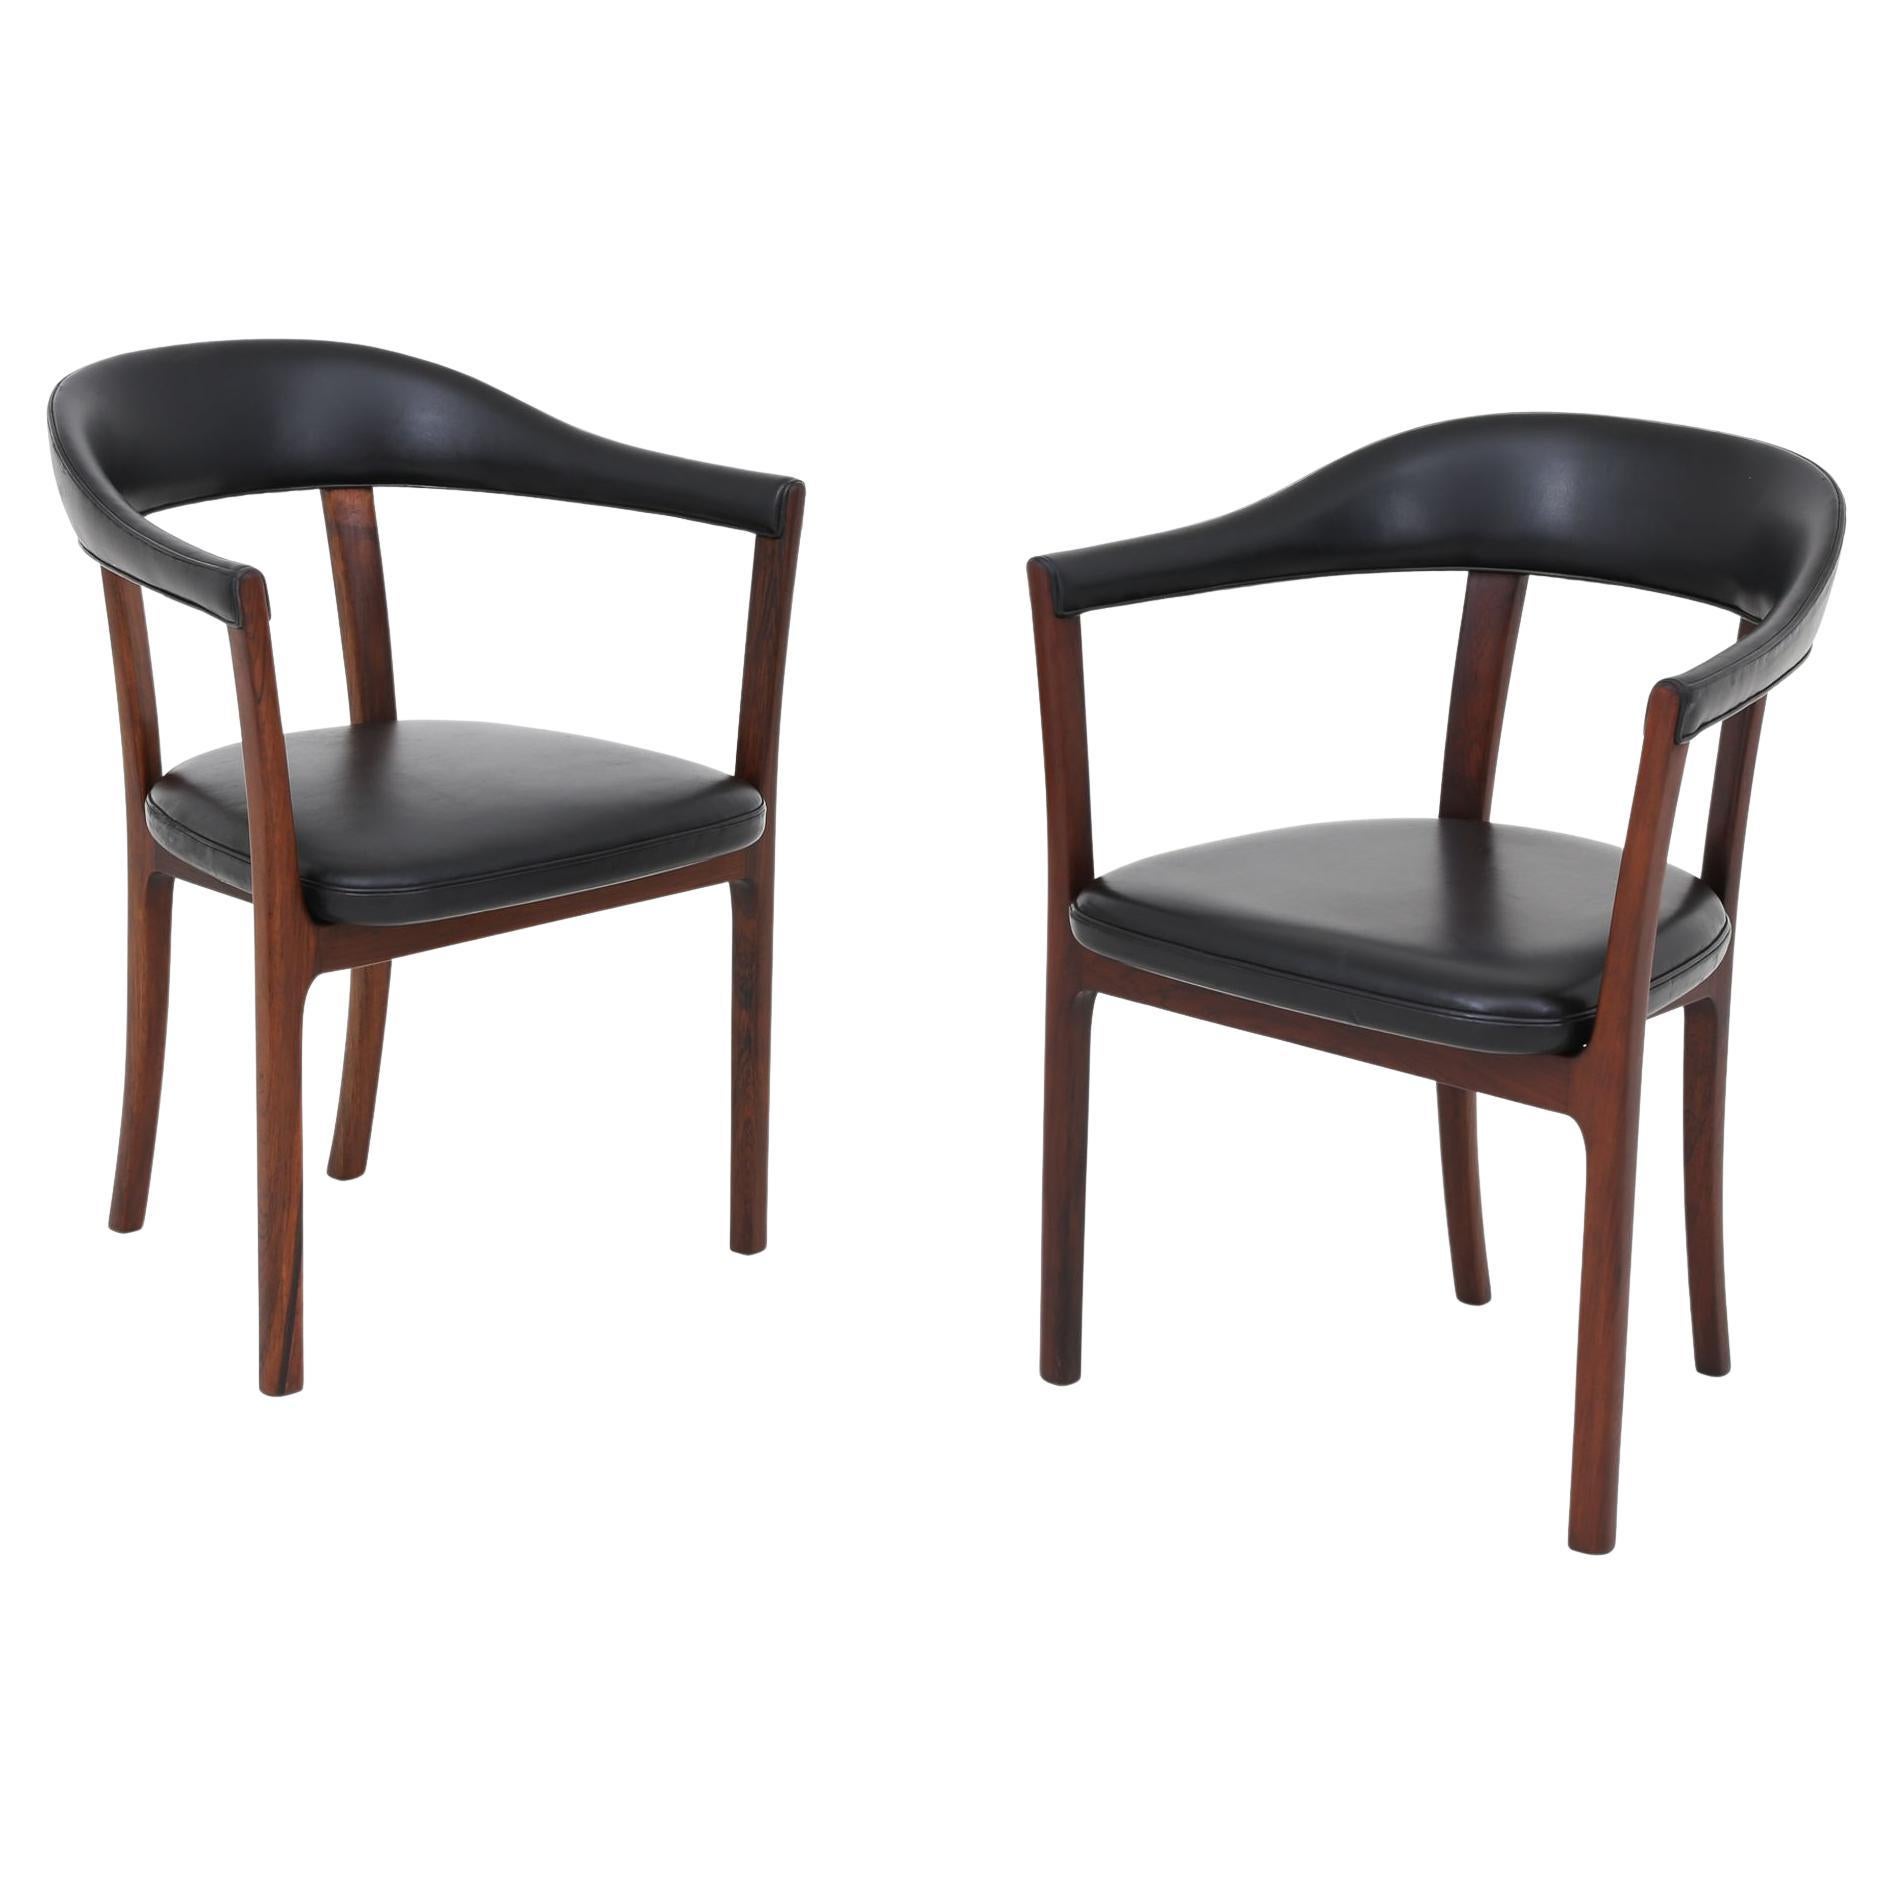 Pair of Armchairs by Ole Wanscher